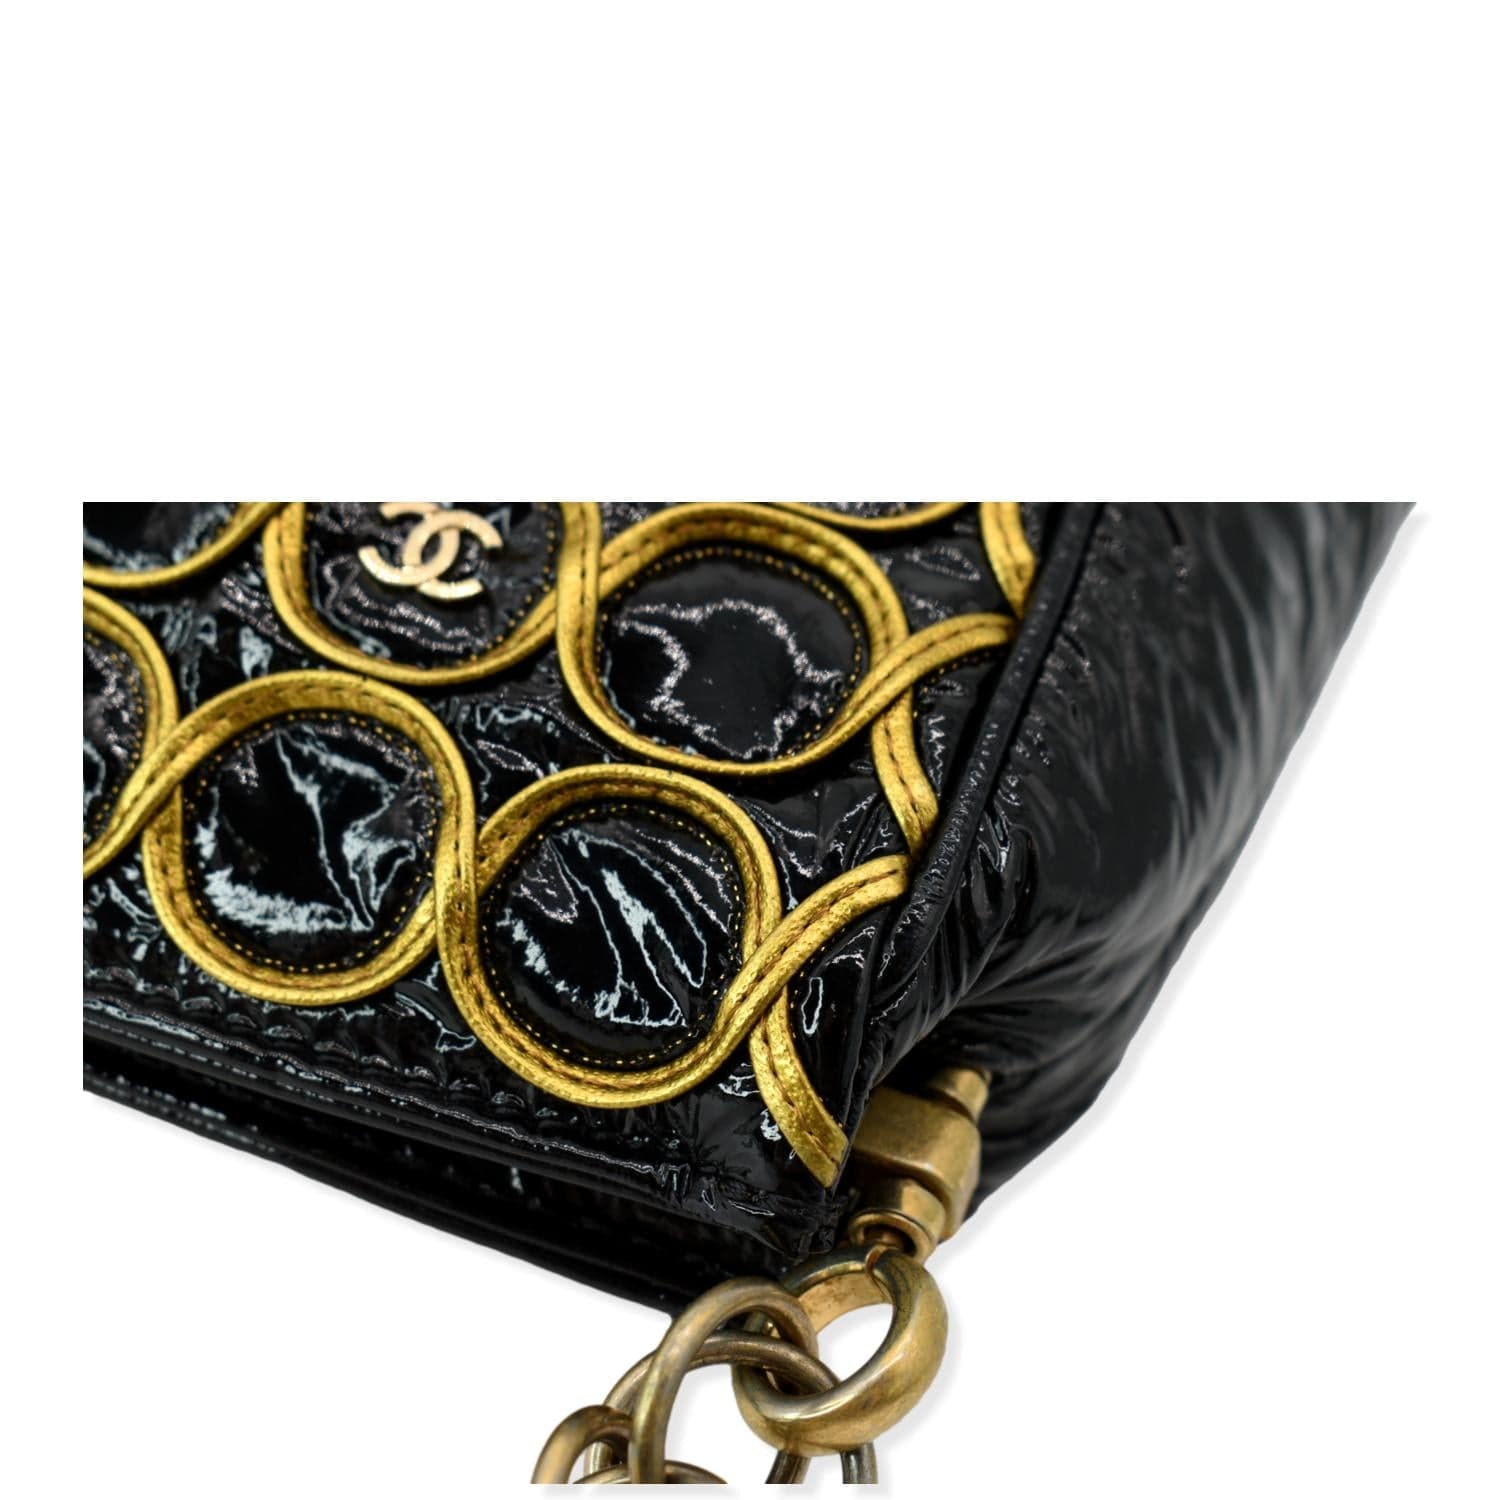 Auth CHANEL - Black Gold Satin Leather Clutch Bag Gold hardware